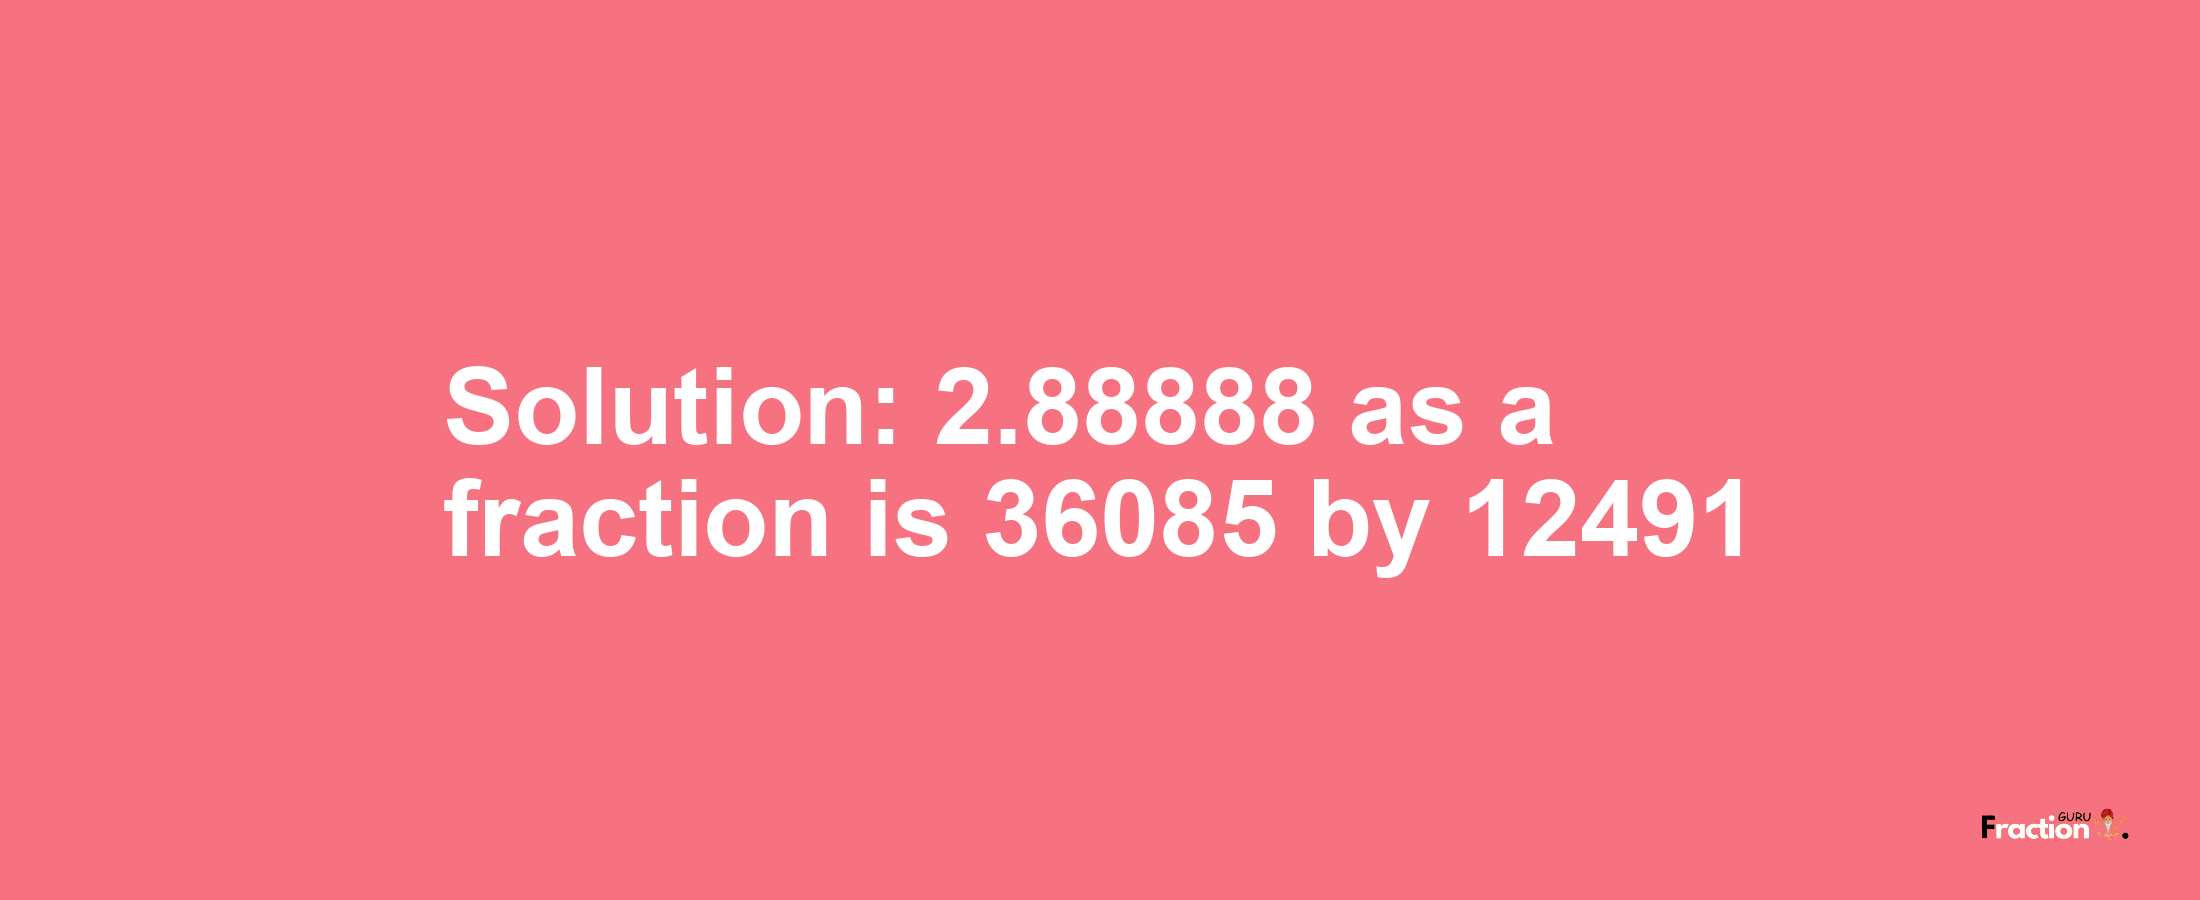 Solution:2.88888 as a fraction is 36085/12491